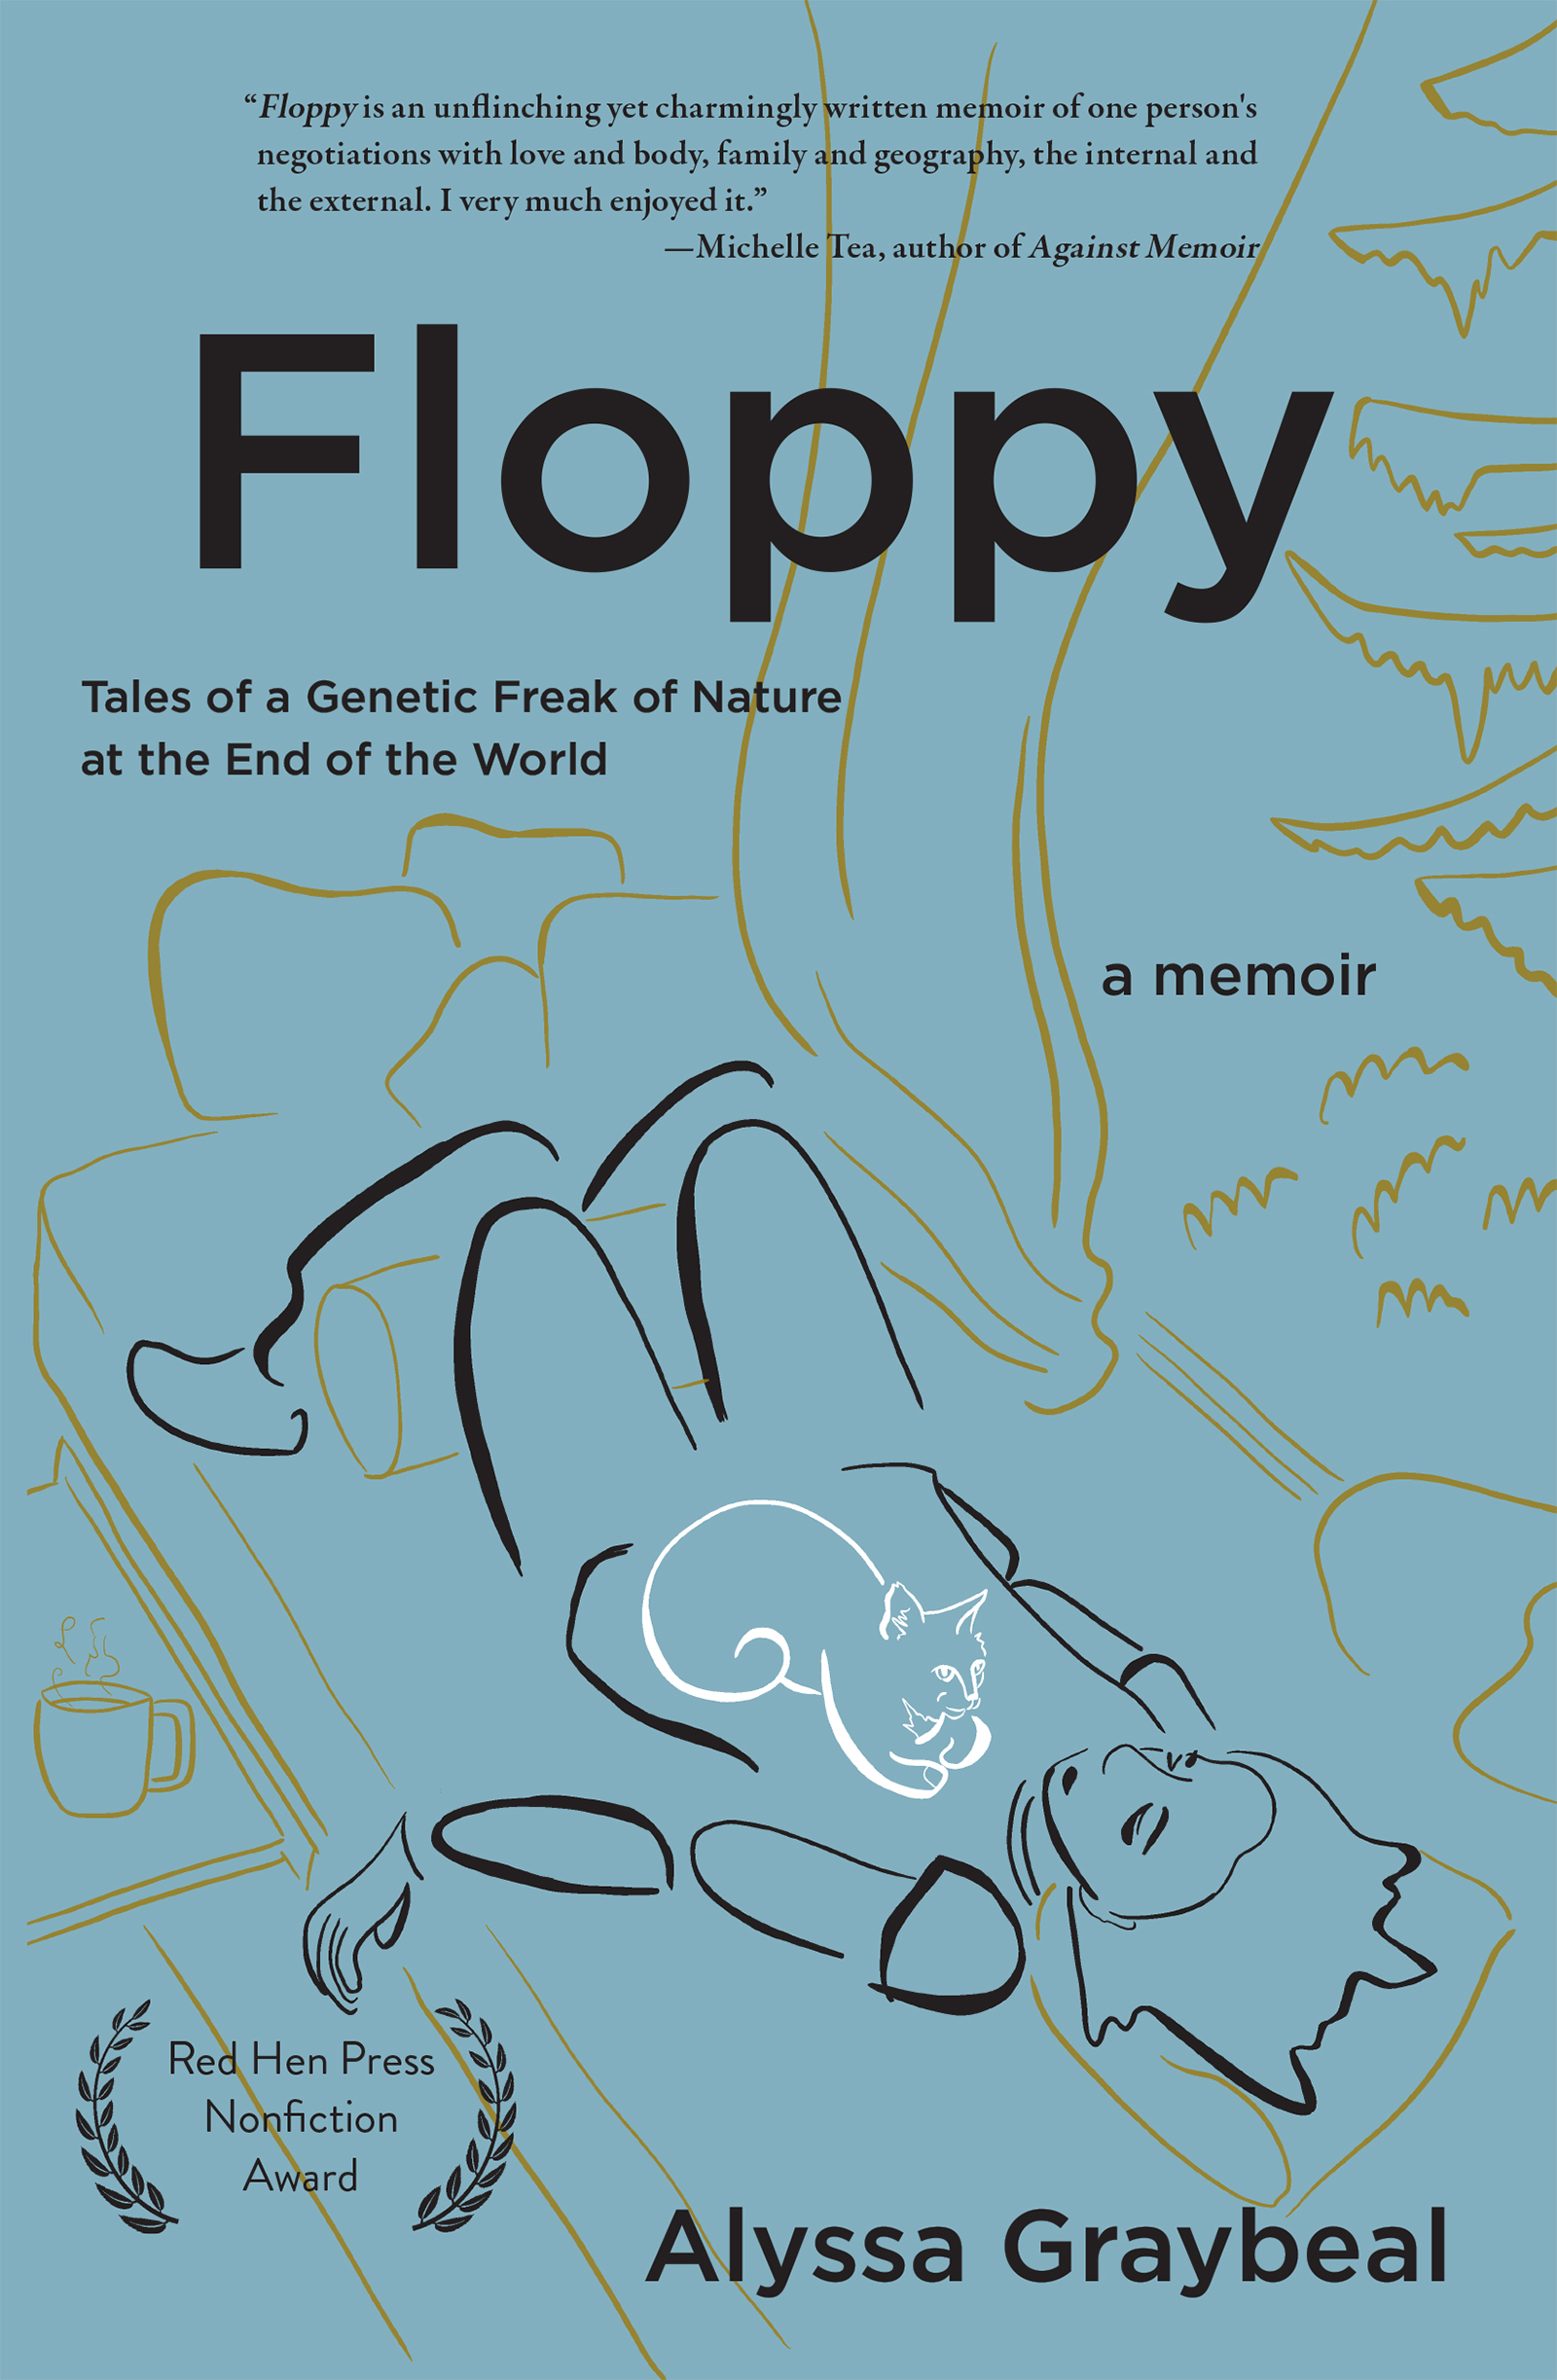 Light blue background featuring minimal line art depicting a person lying in bed next to a window with an open curtain showing trees outside. A cat rests on the person's stomach. Black text reads "Floppy" with a subtitle of "Tales of a Genetic Freak of Nature at the End of the World: a memoir by Alyssa Graybeal." Laurels declare the book as the winner of the Red Hen Press Nonfiction Award.